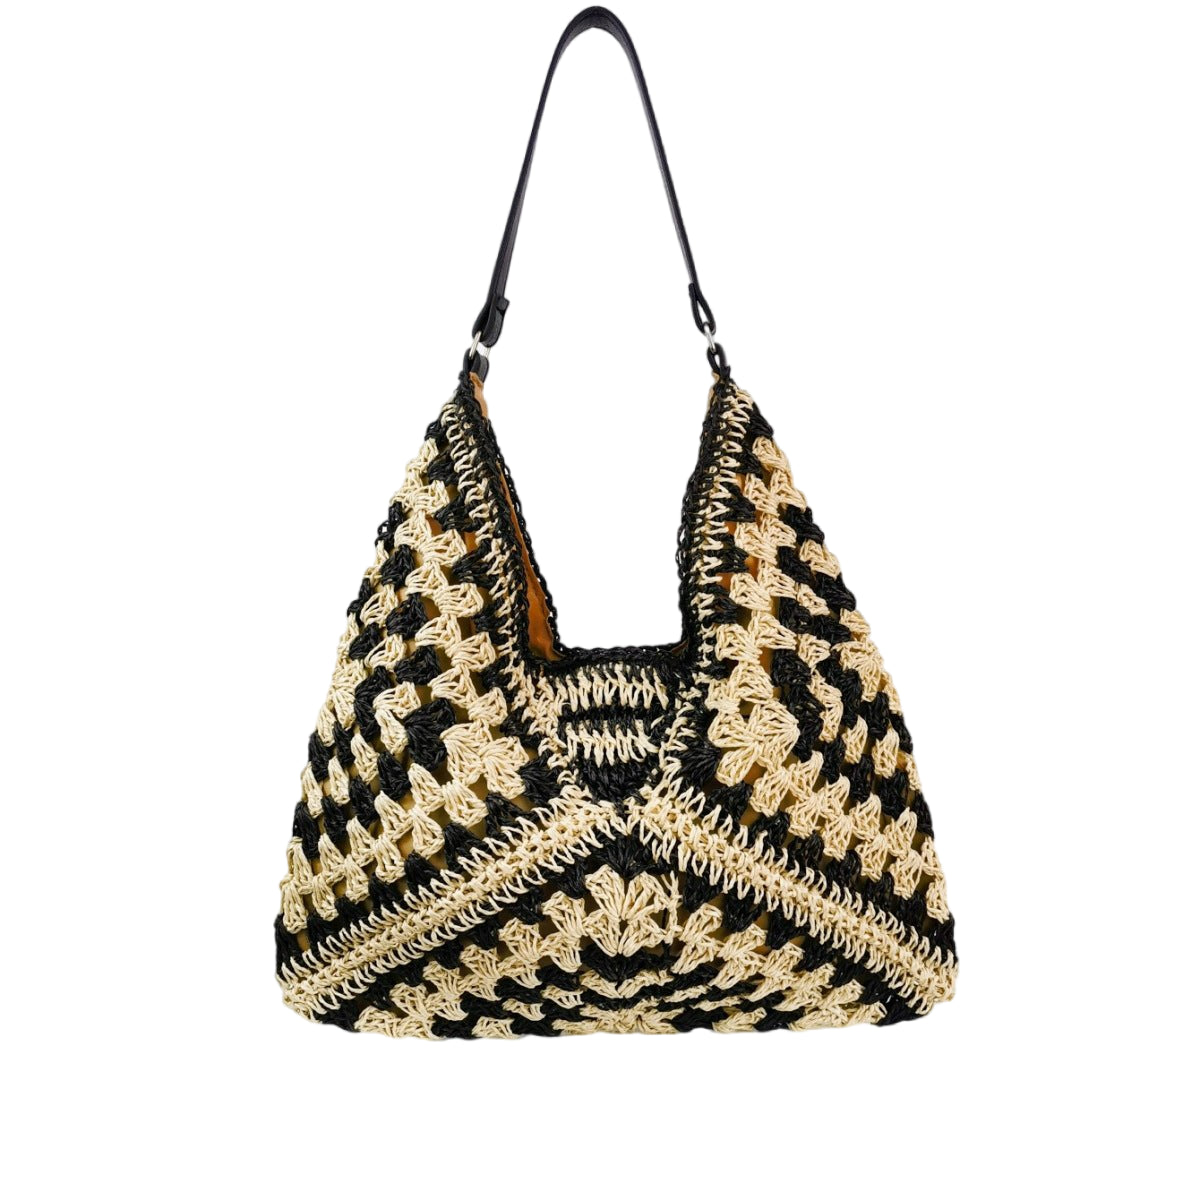 Hand Woven Straw Tote Bag